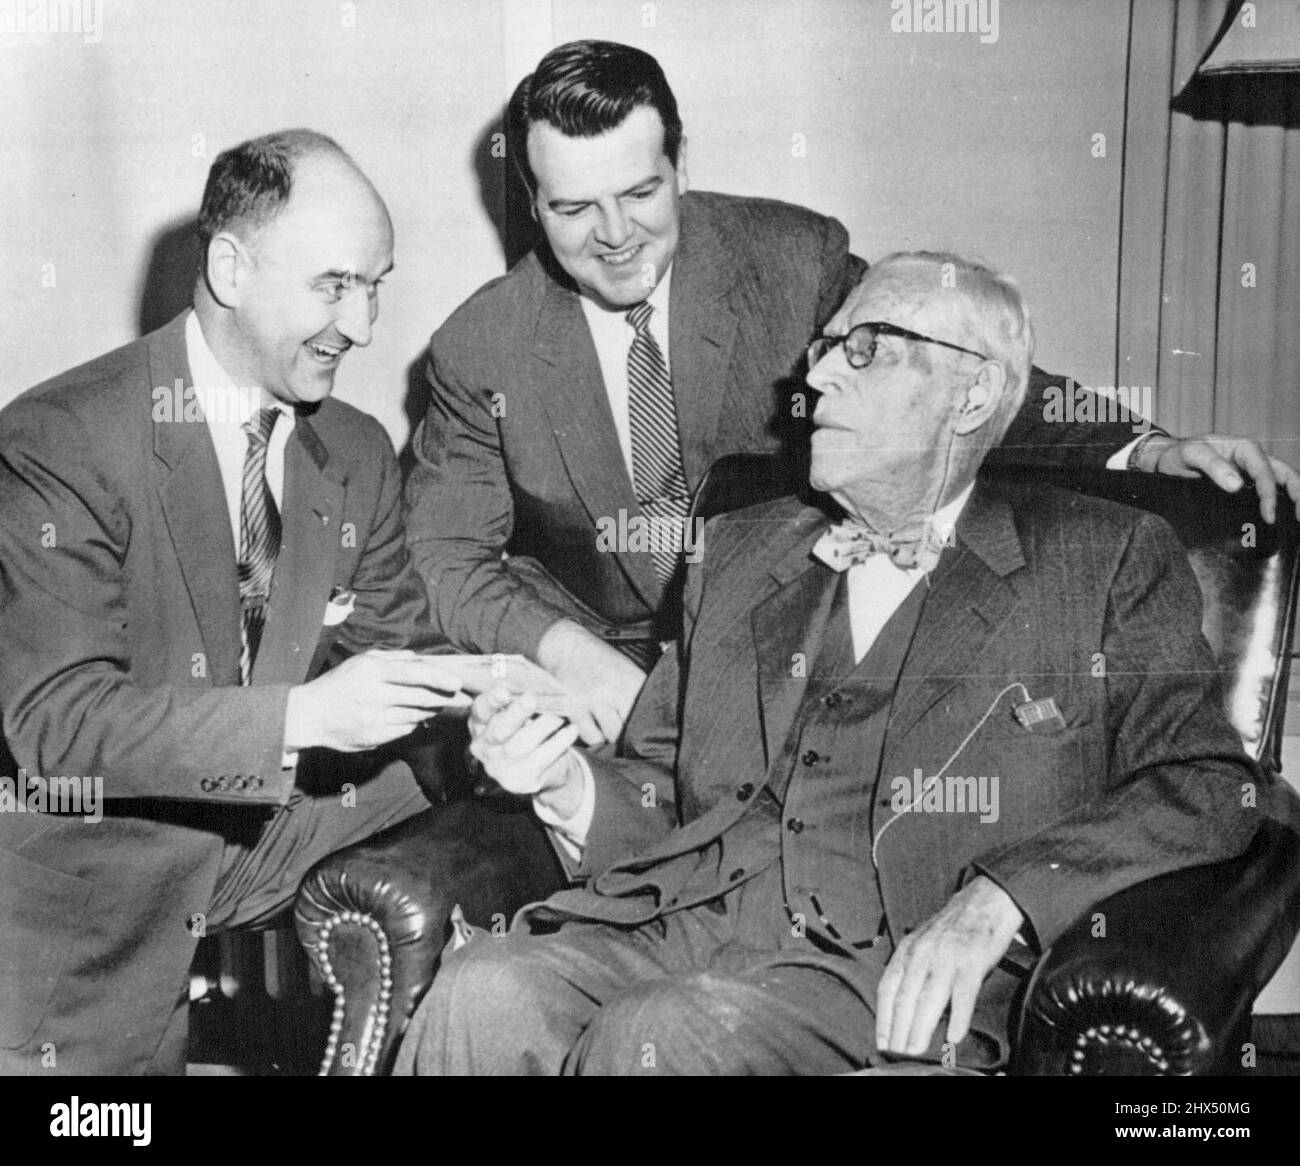 Outlives Insurance Policy -- William S. Spellman, seated, father of Francis Cardinal Spellman, receives a check representing full payment on his life insurance policy from Edward Livingston (left) and Charles H. Kerrigan, Union Central Life Insurance Co., representatives, here today. Insurance officials said the 96-year-old man has outlived the policy which happens only one time in 100,000. The amount of the check is several thousand dollars. November 15, 1954. (Photo by AP Wirephoto). Stock Photo